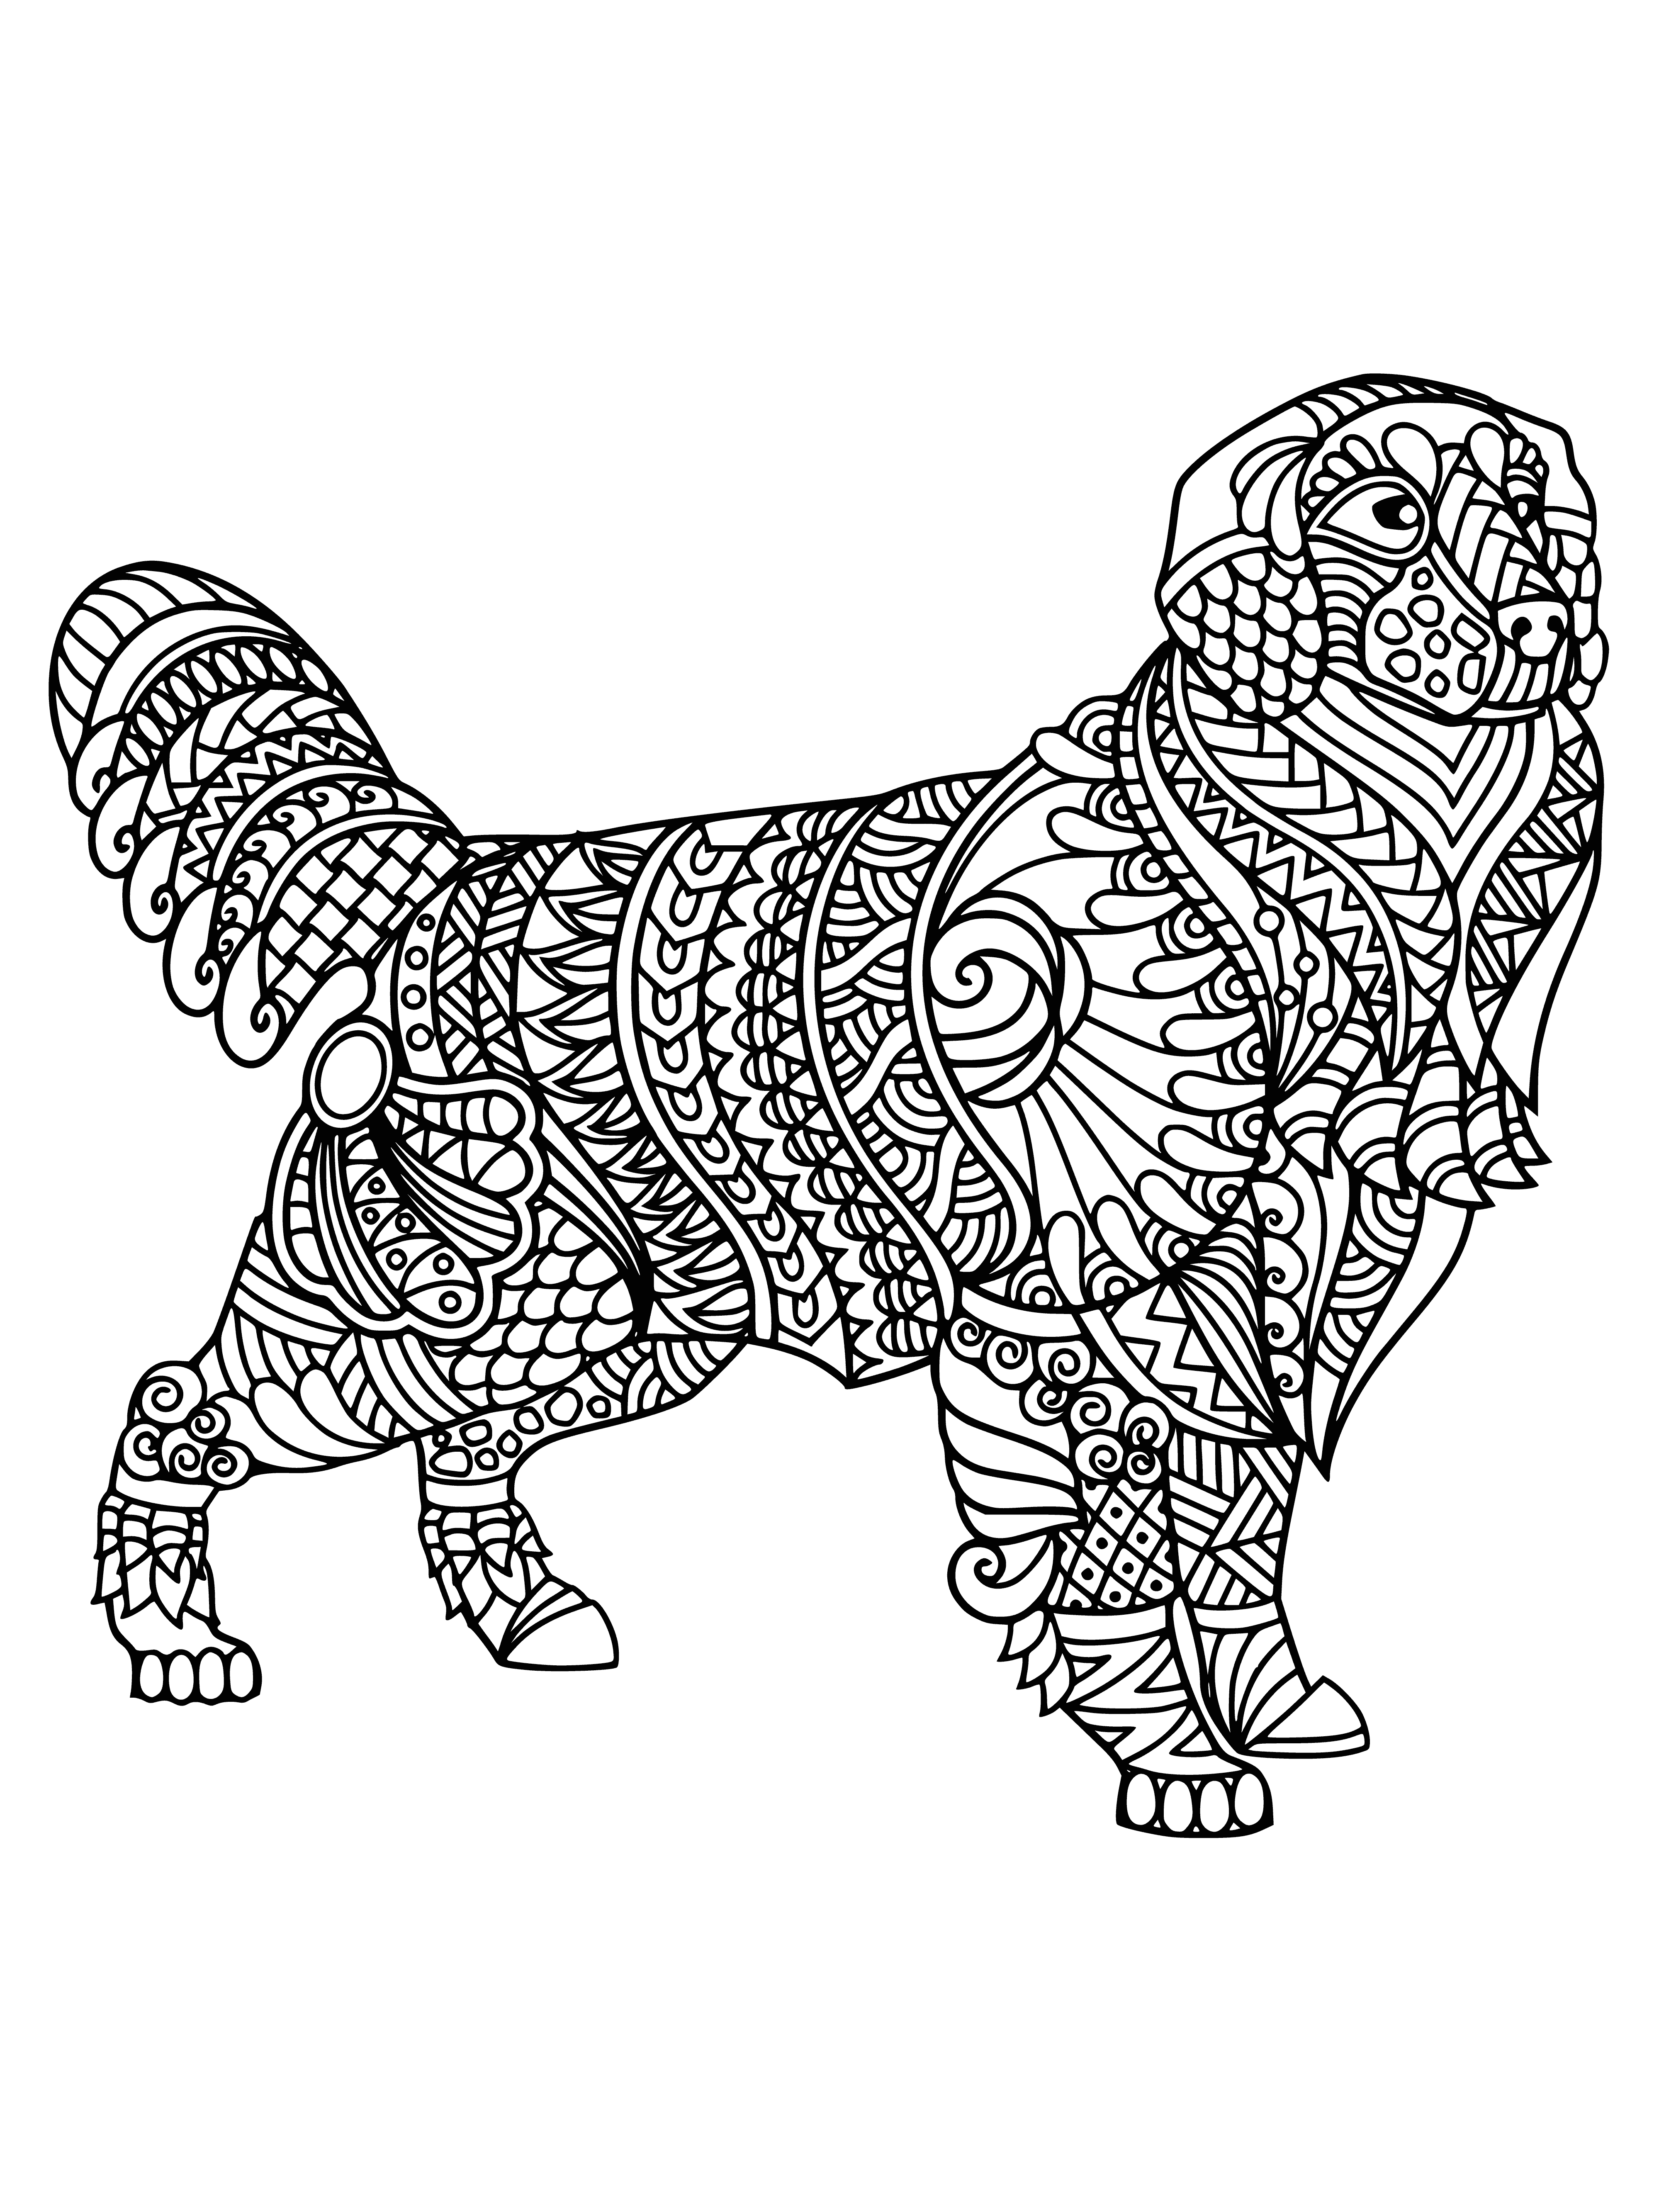 coloring page: A golden retriever dog stands in a grassy field, happy and relaxed, with his tongue out! #coloringpages #doggo